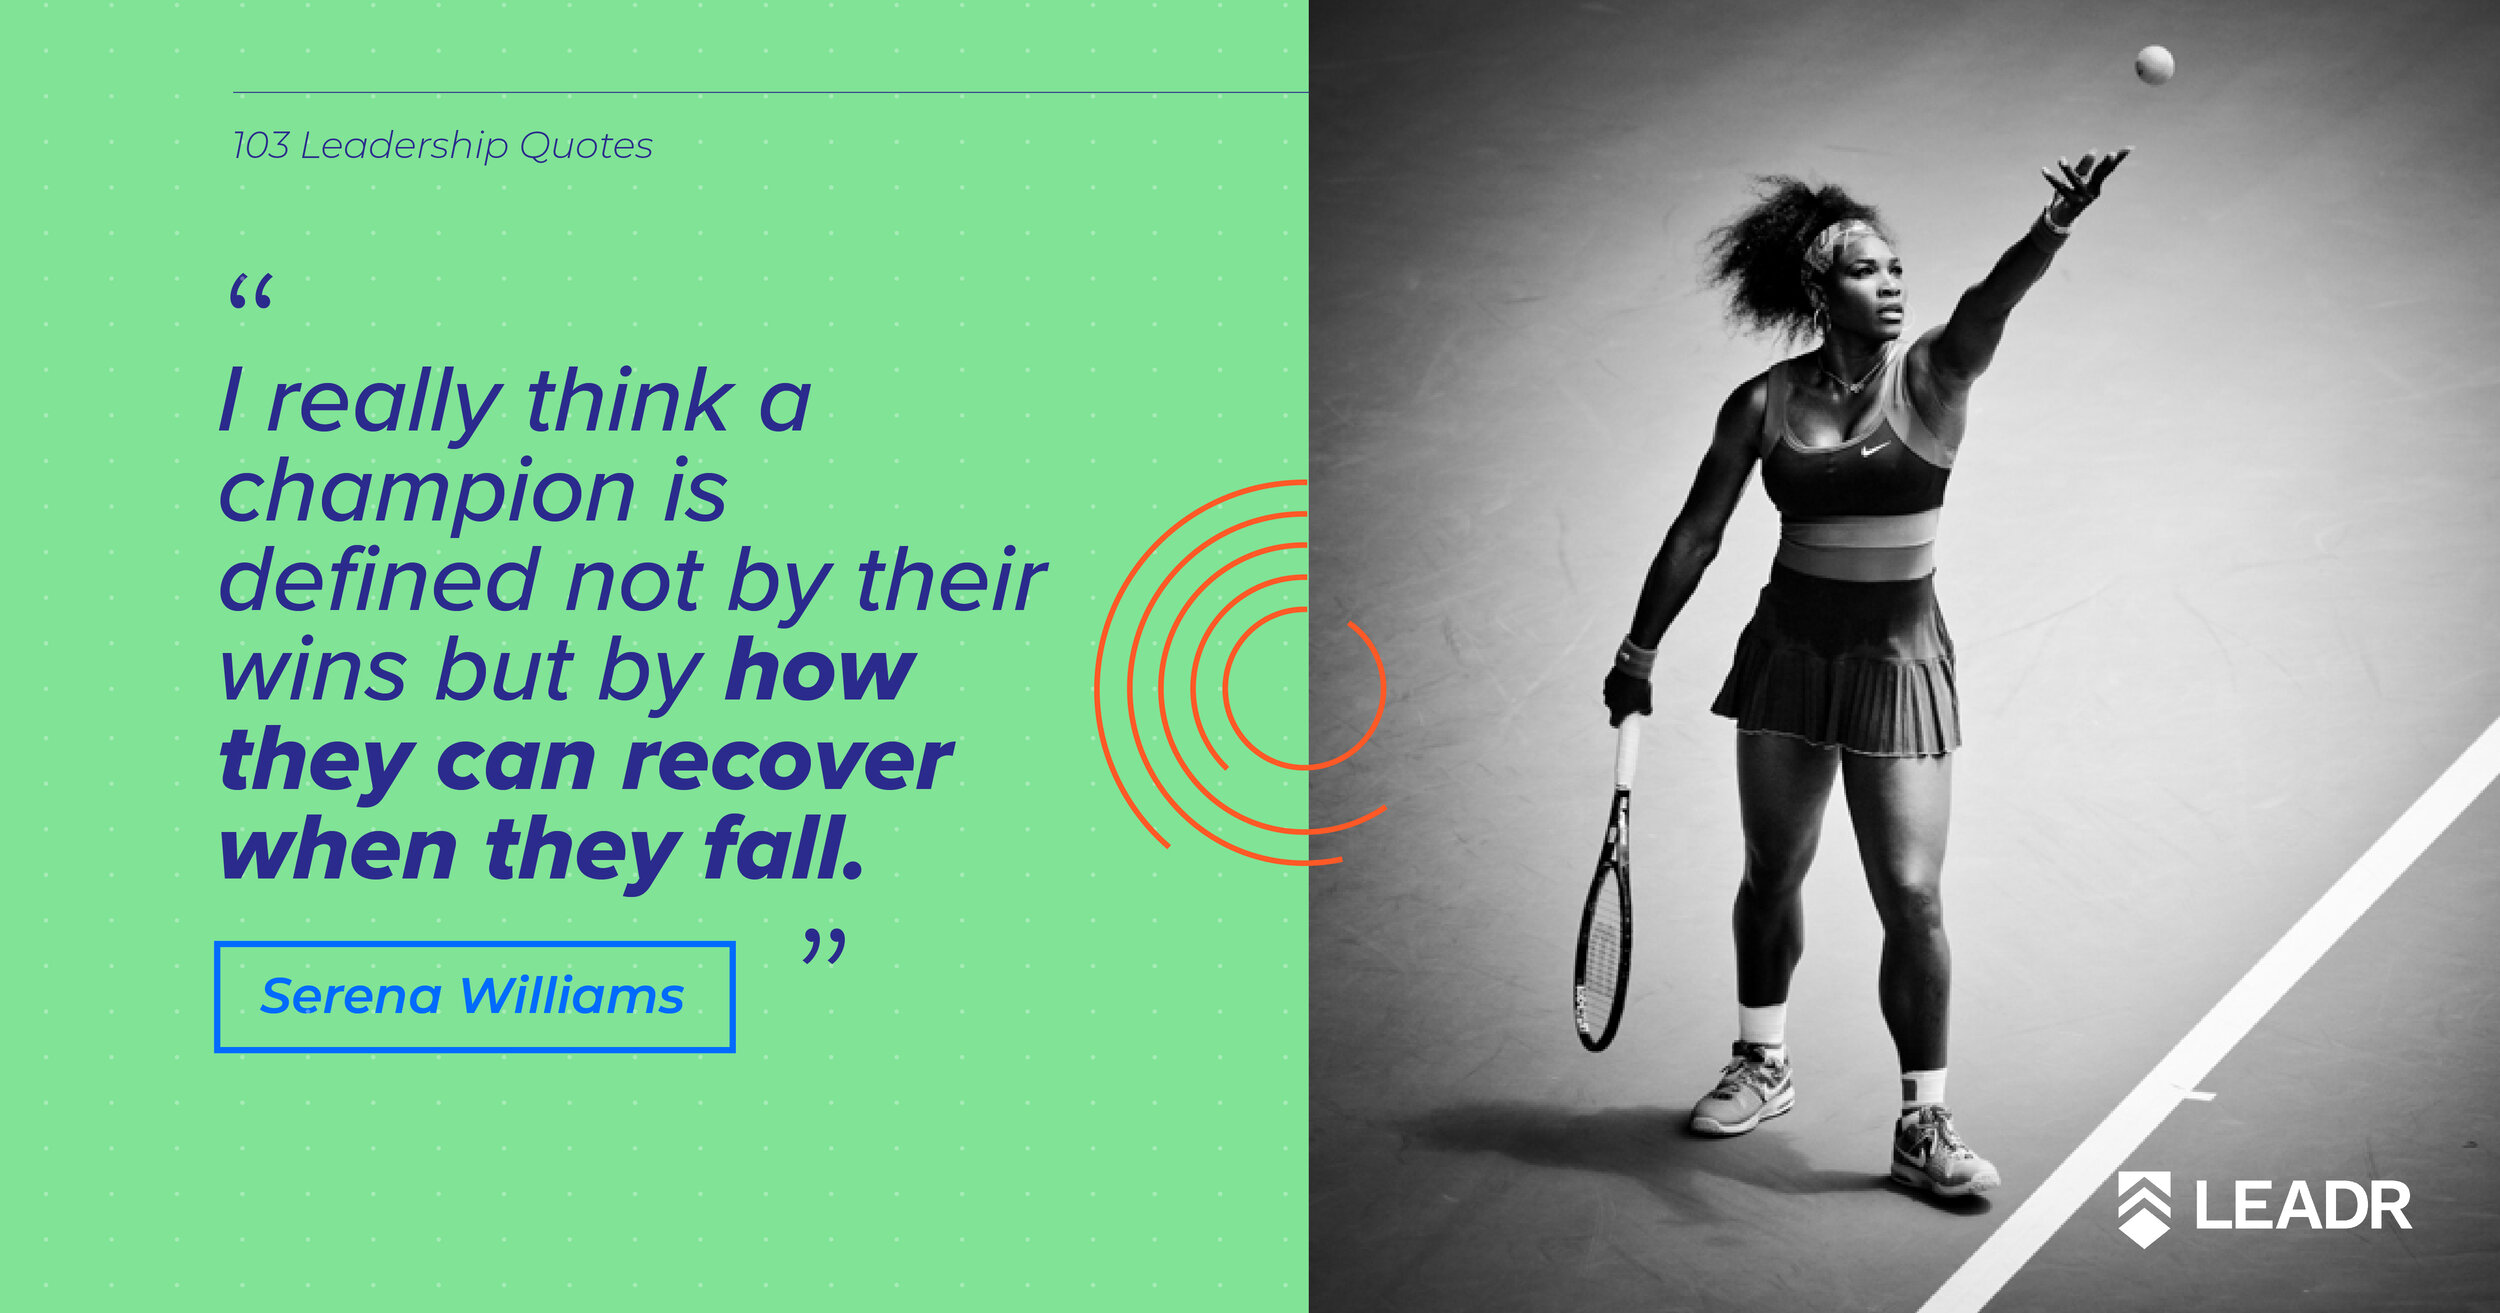 Royalty free downloadable leadership quotes - Serena Williams